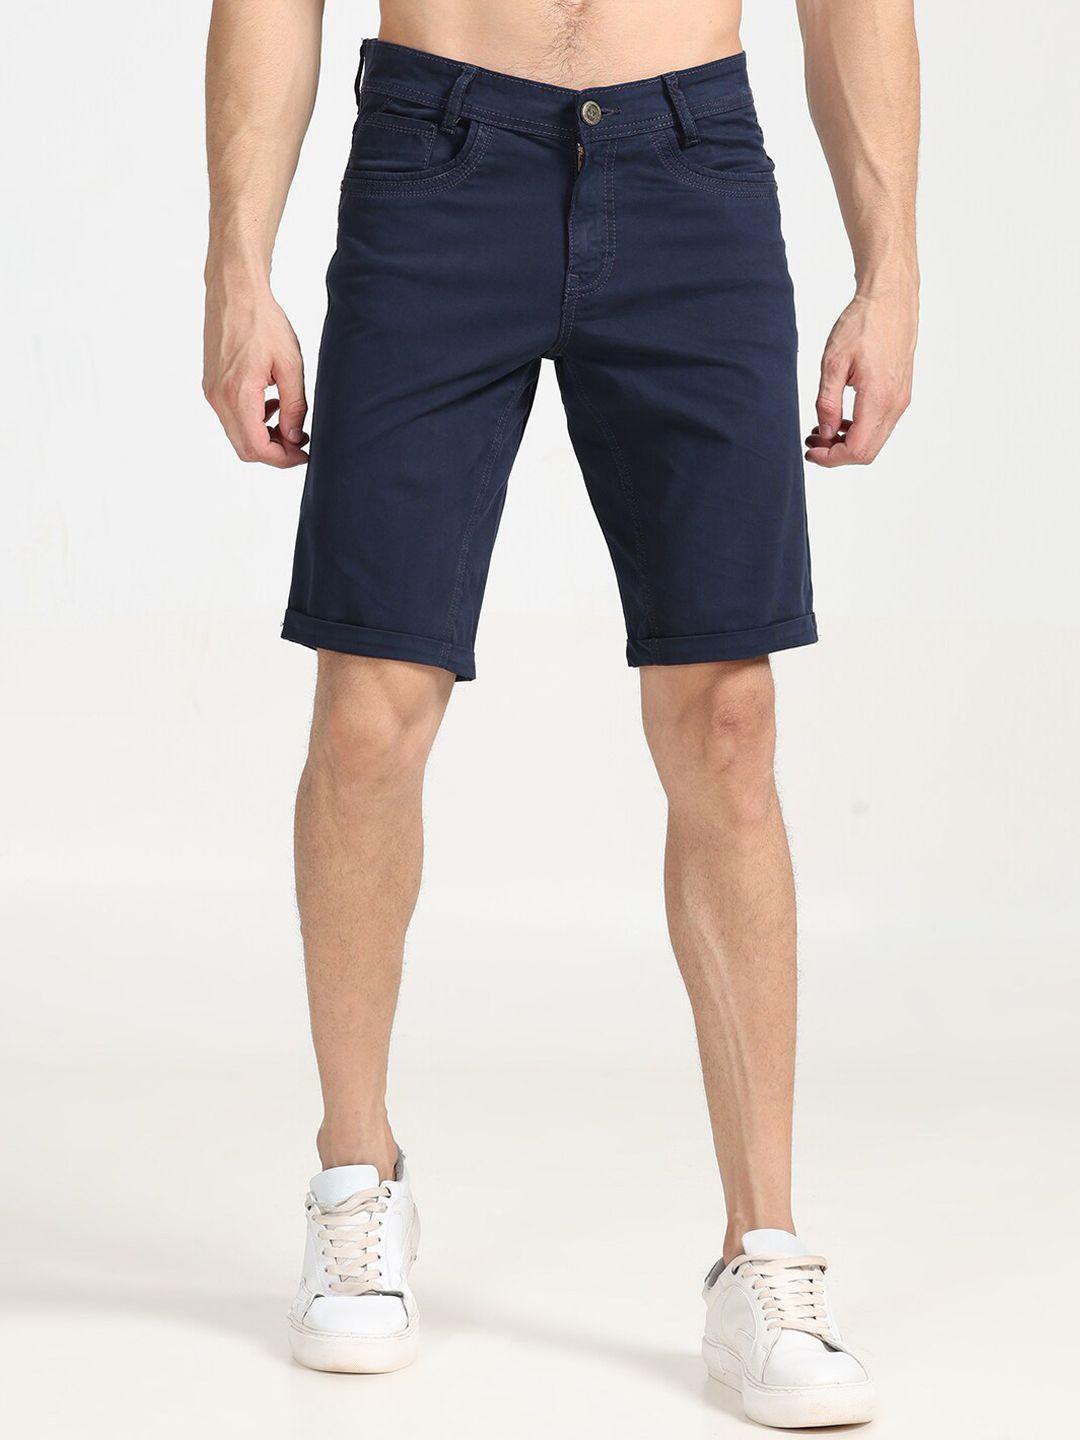 jean cafe men navy blue slim fit chino shorts